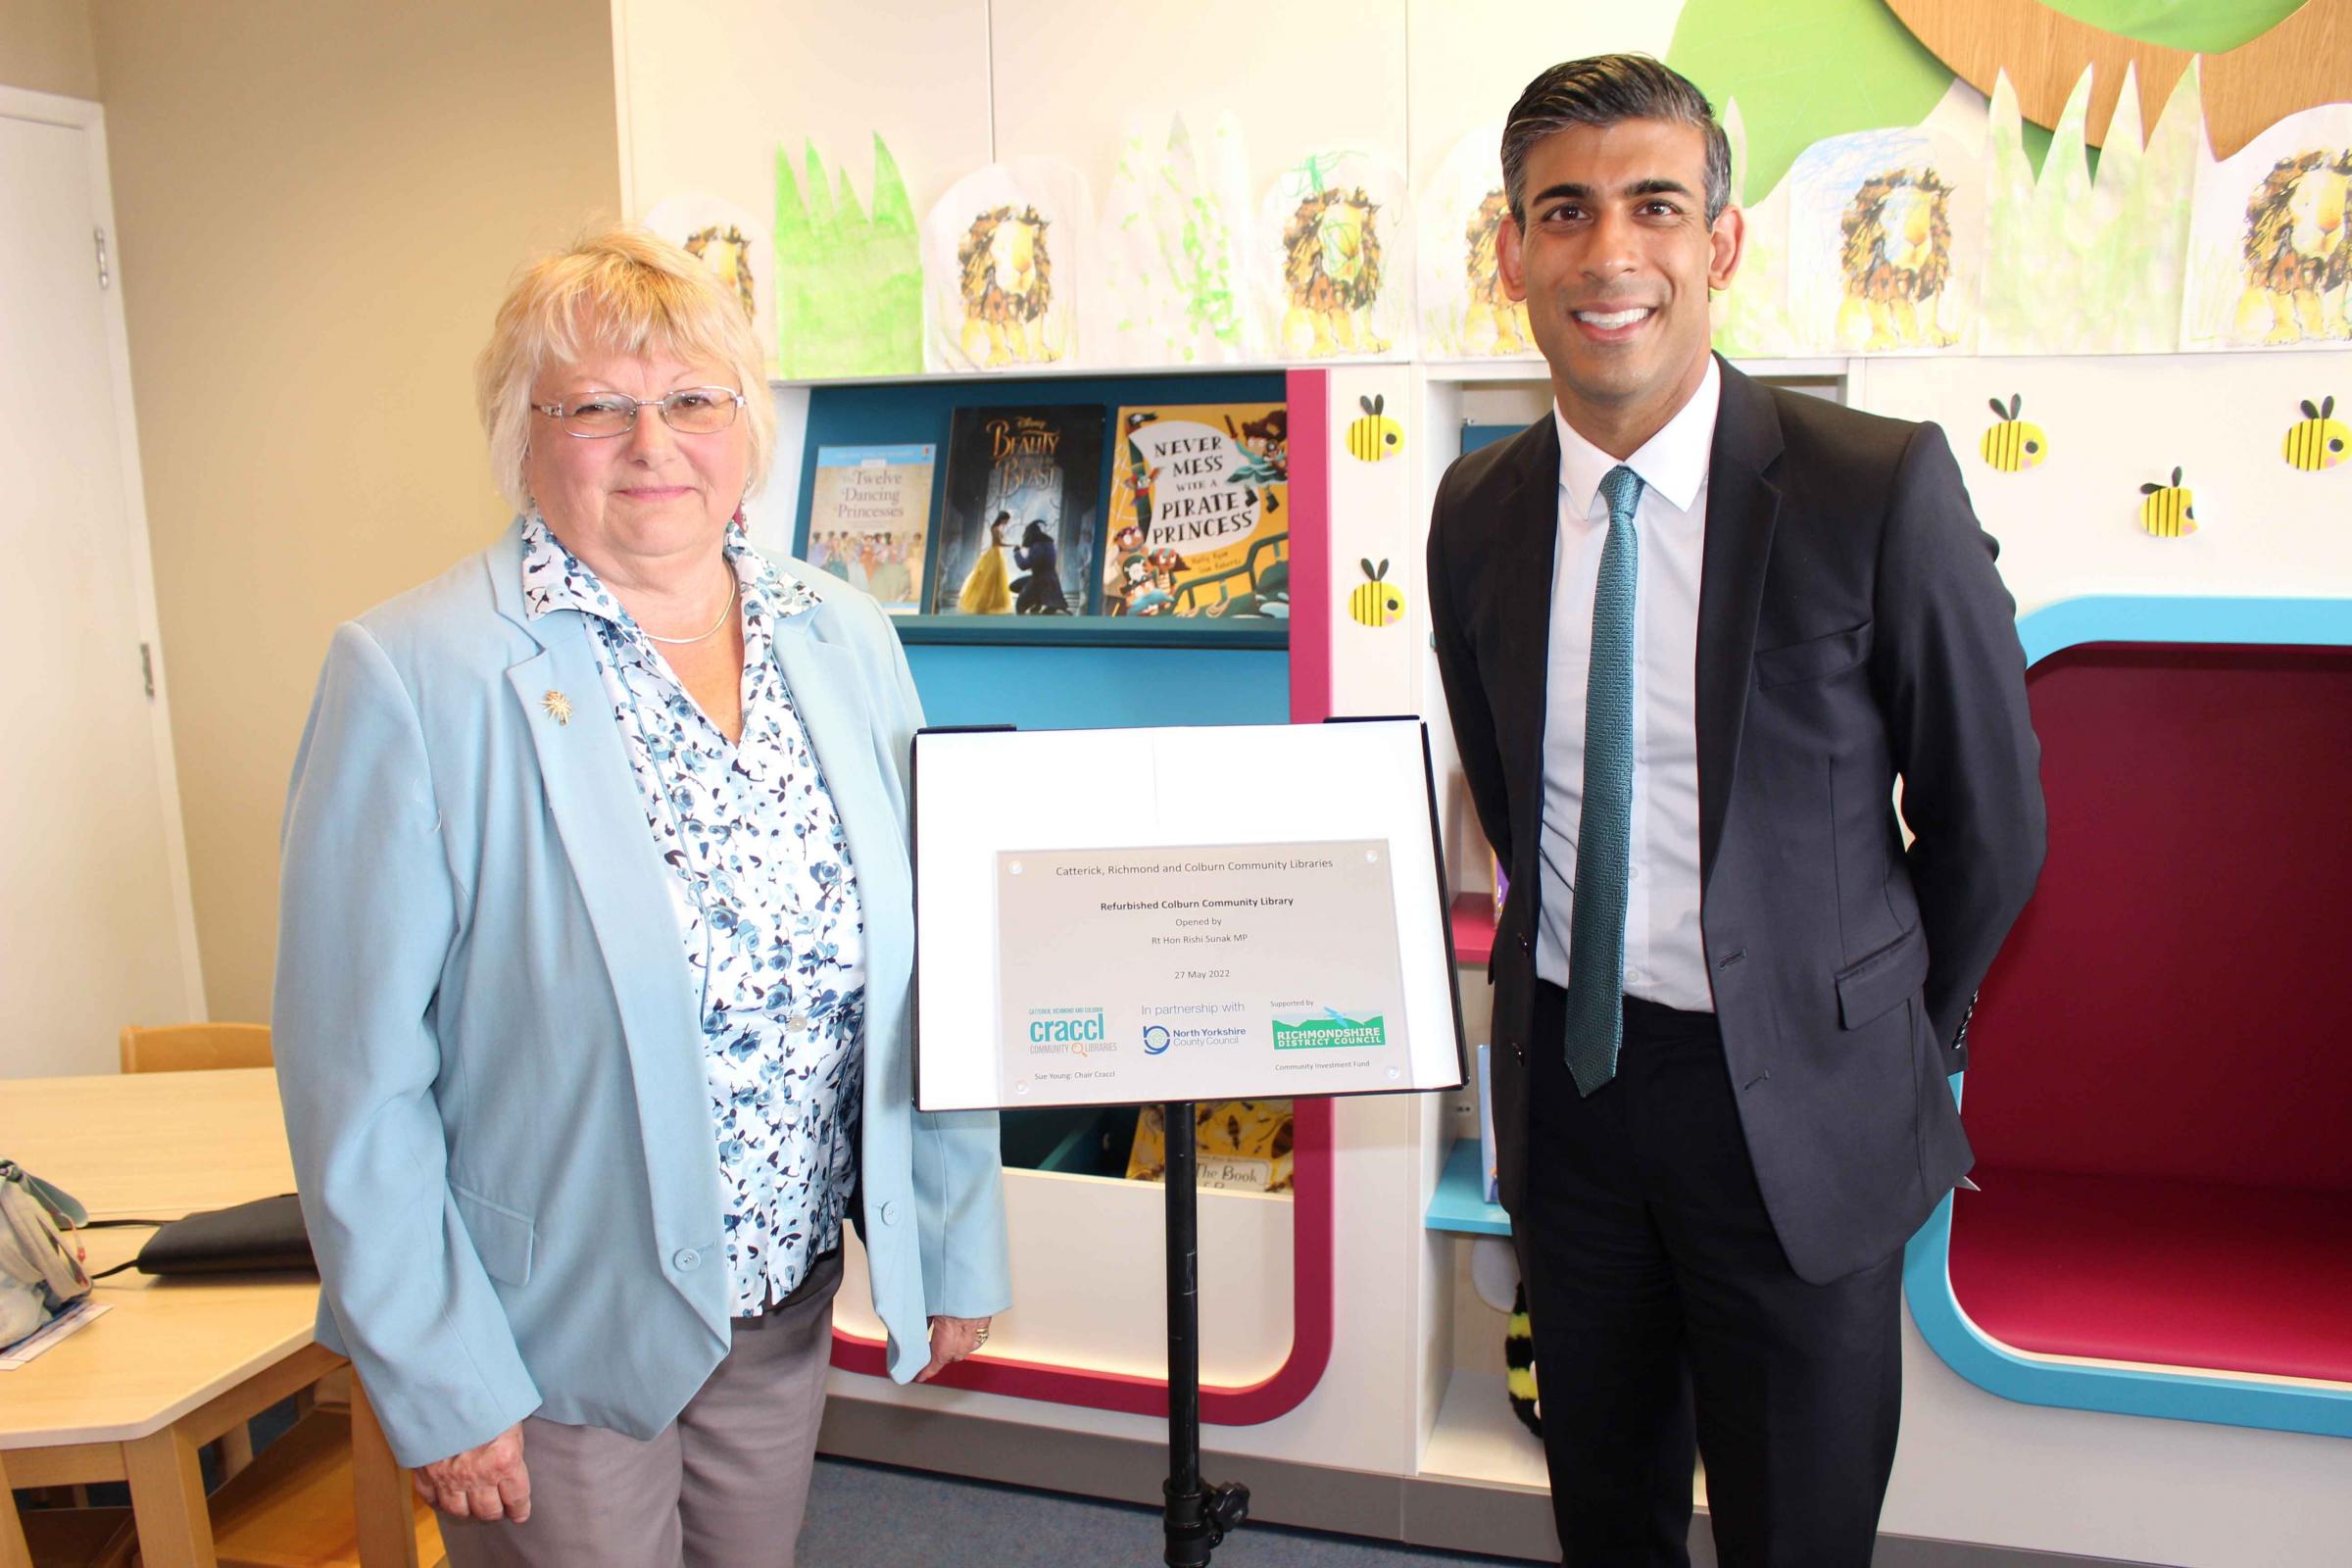 Rishi Sunak formally opens the refurbished Colburn Library with the chair of CRCCL Sue Young